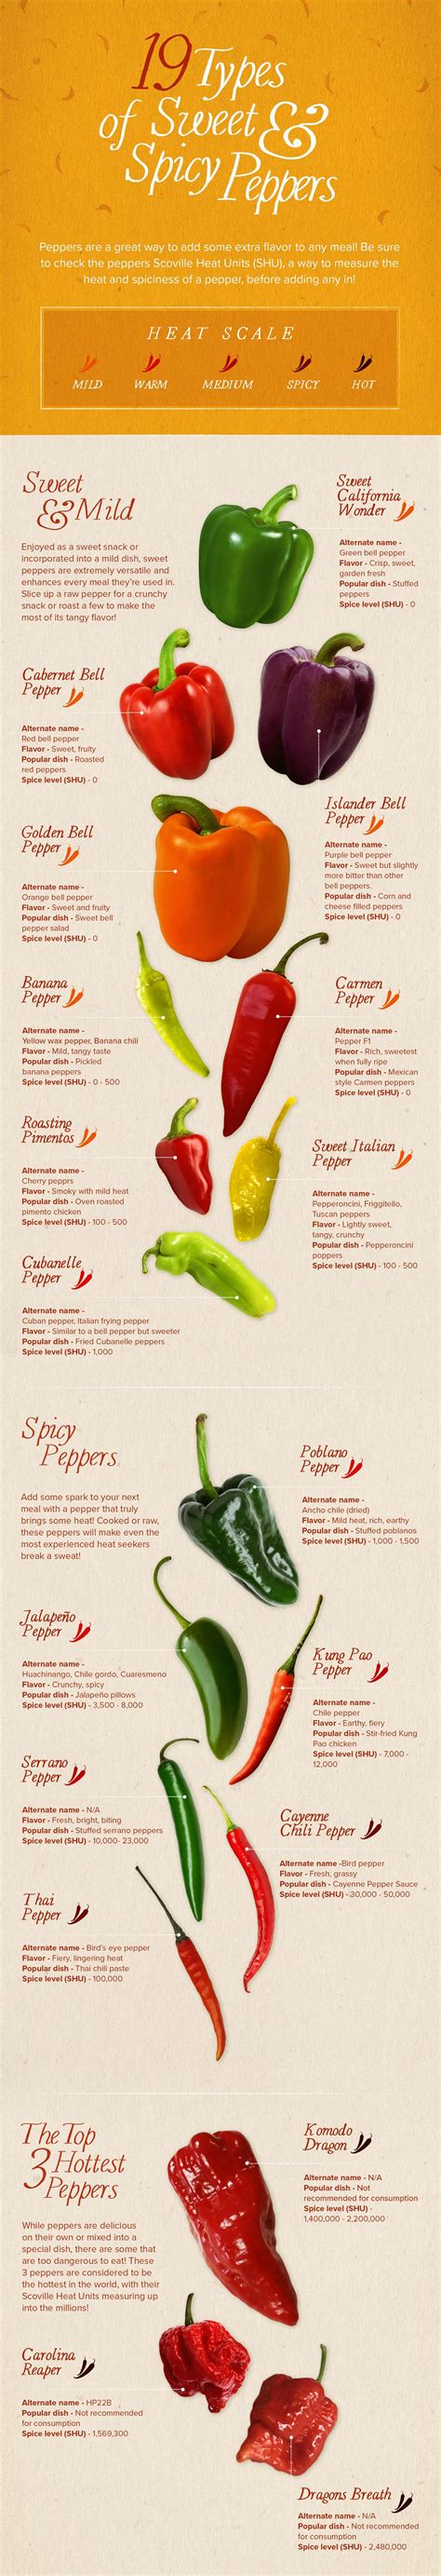 did you know there s 19 types of peppers pickled banana peppers stuffed banana peppers